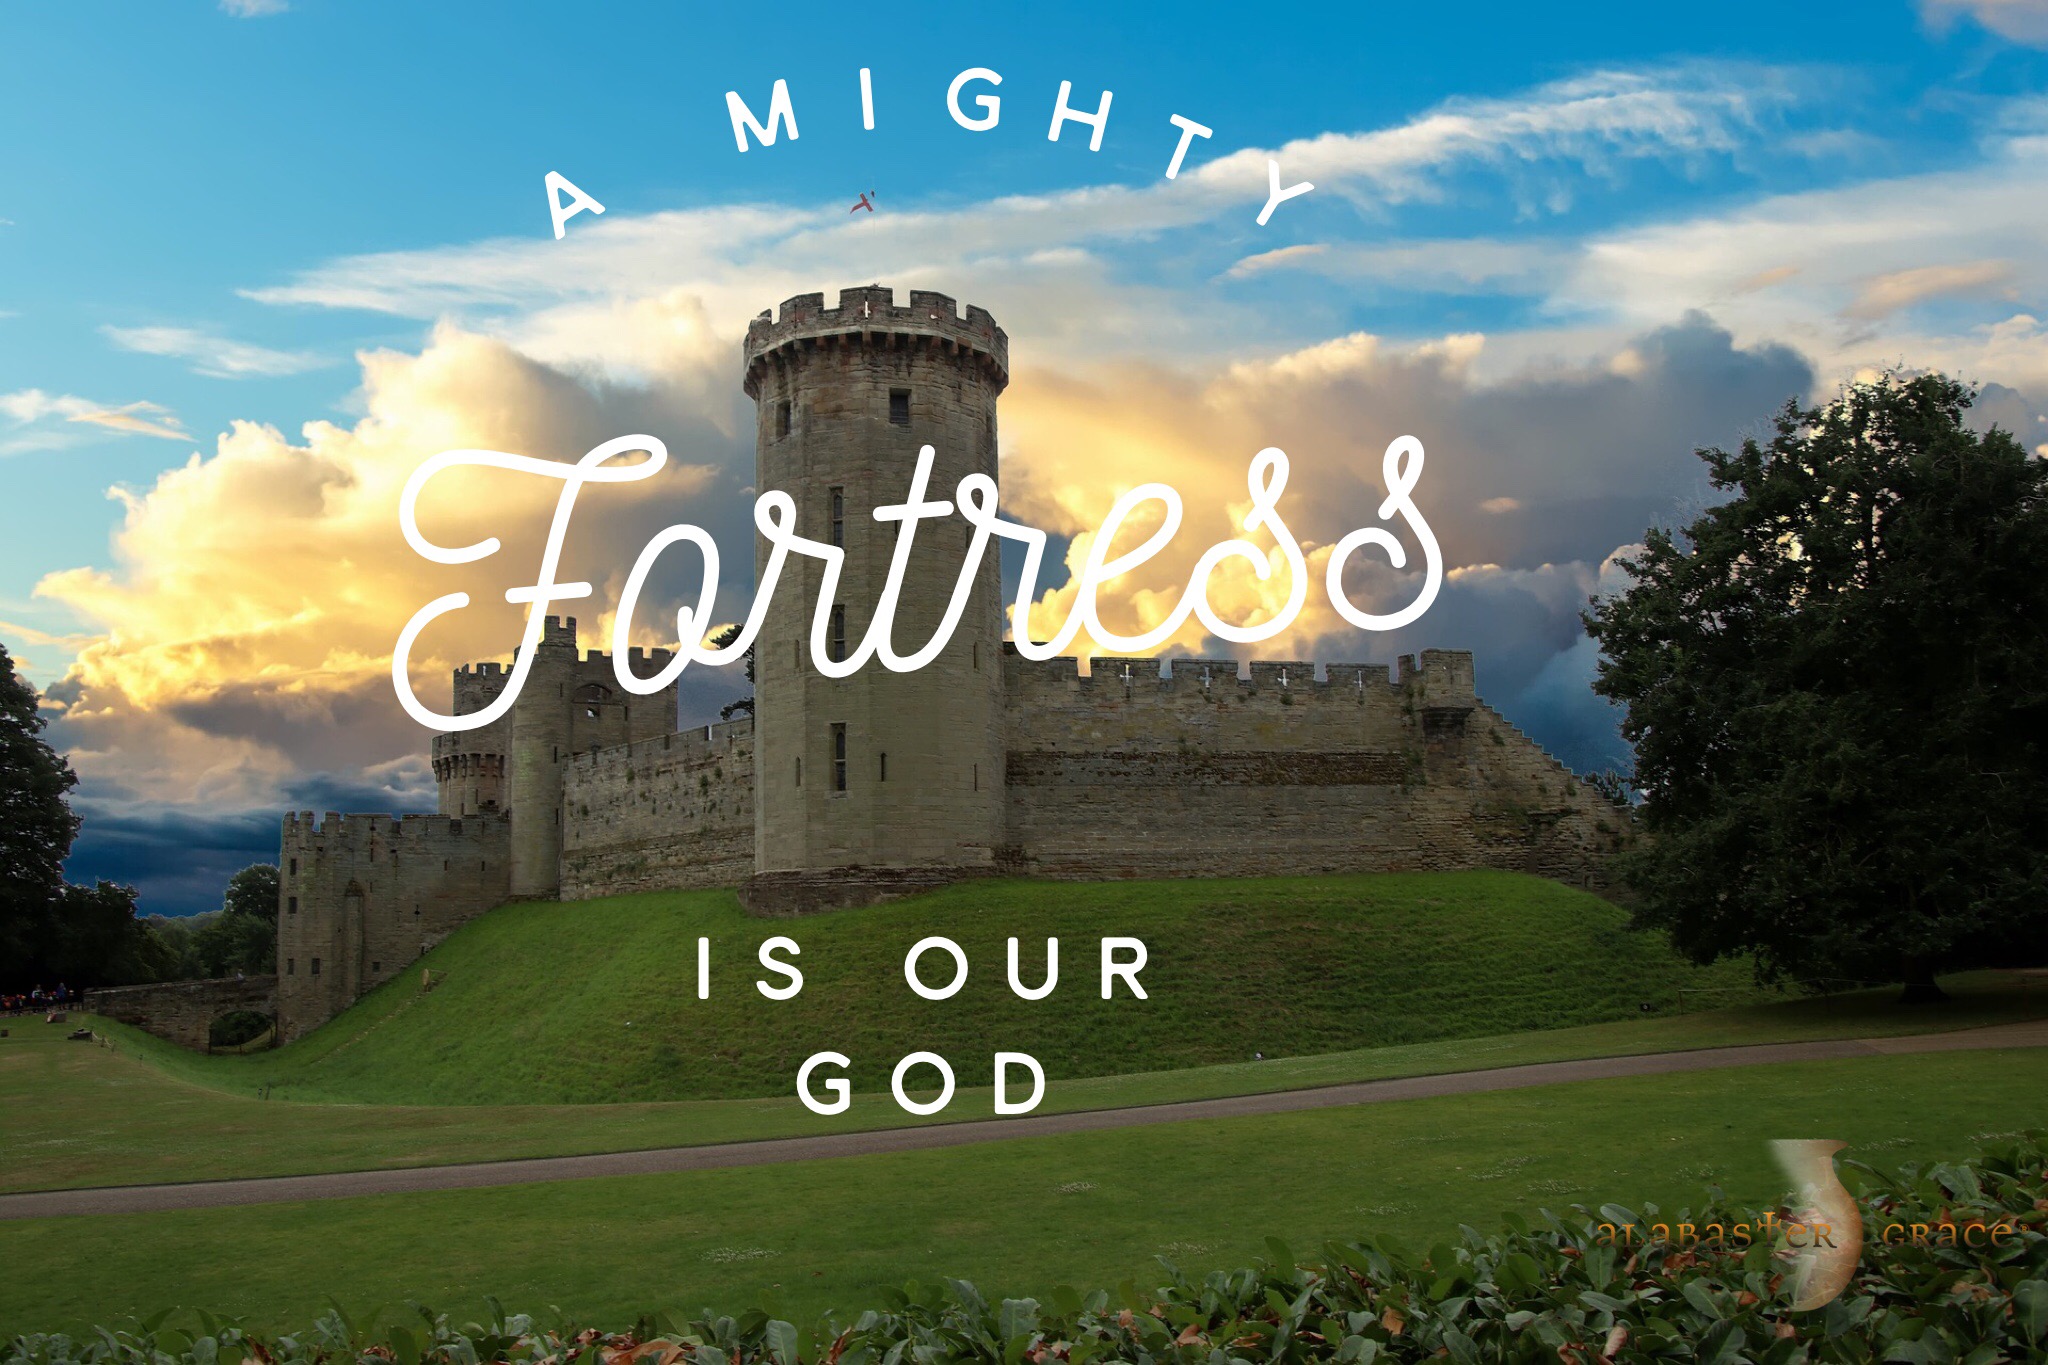 A Mighty Fortress Is My God - The Battle Hymn of The Reformation